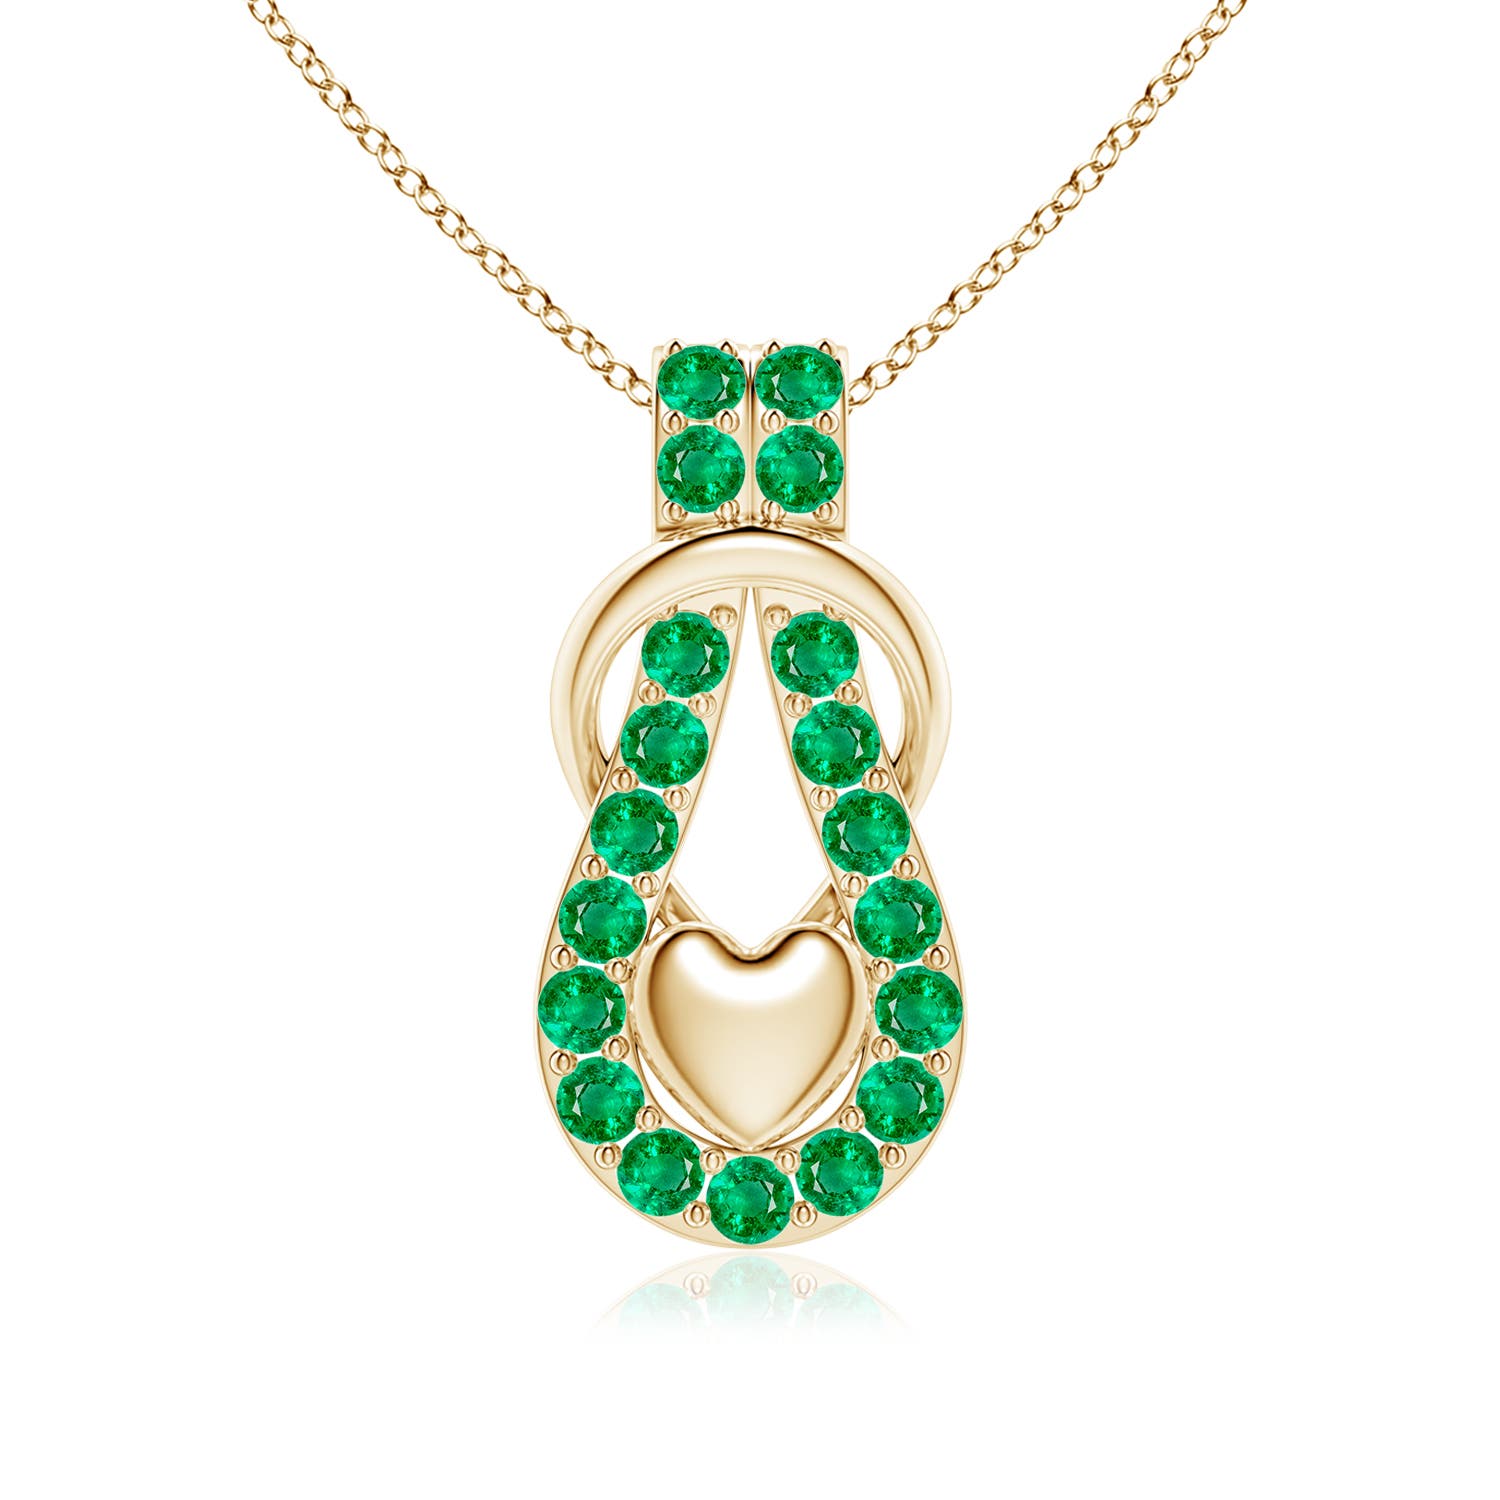 AAA - Emerald / 1.9 CT / 14 KT Yellow Gold